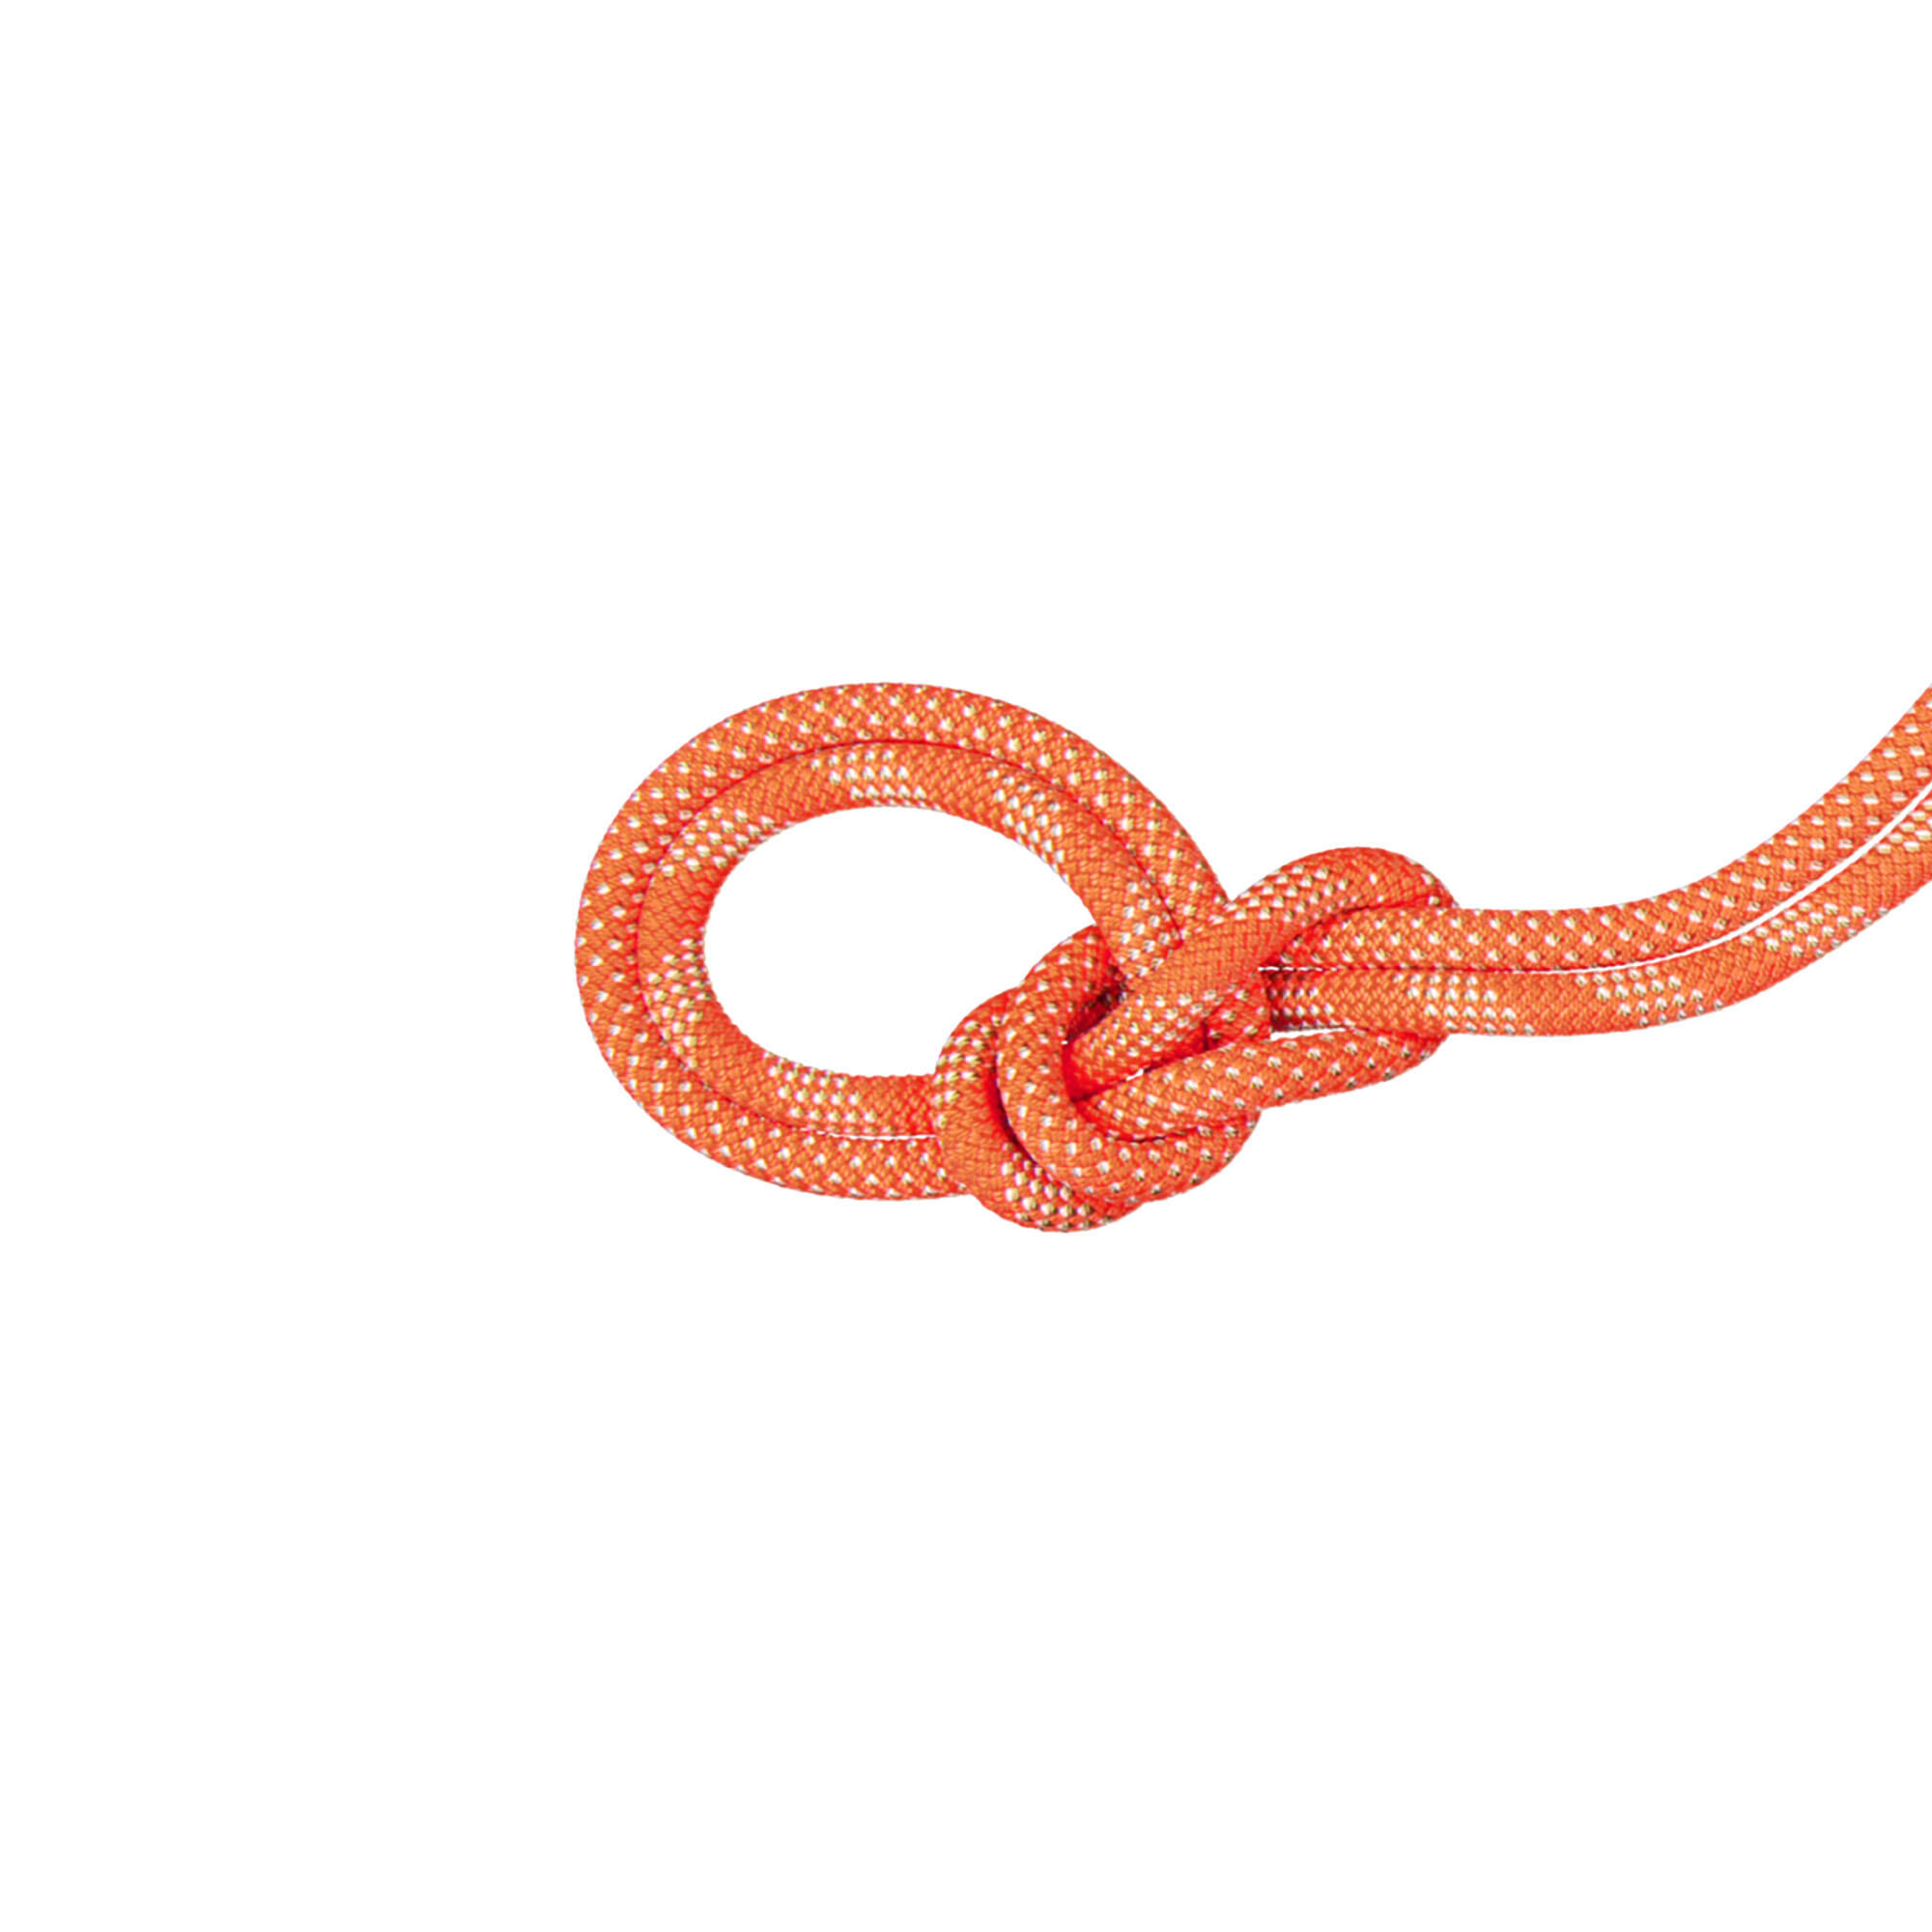 Crag Classic Duodess Single Rope 9.8 mm x 60m 4/4